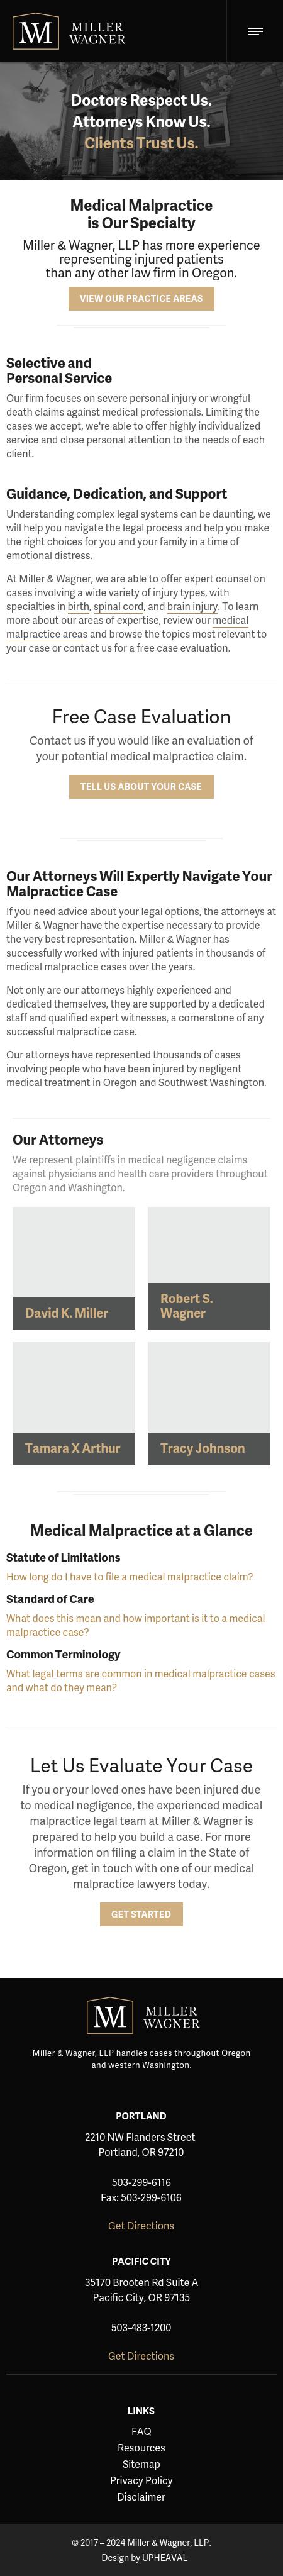 Miller & Wagner, LLP - Portland OR Lawyers